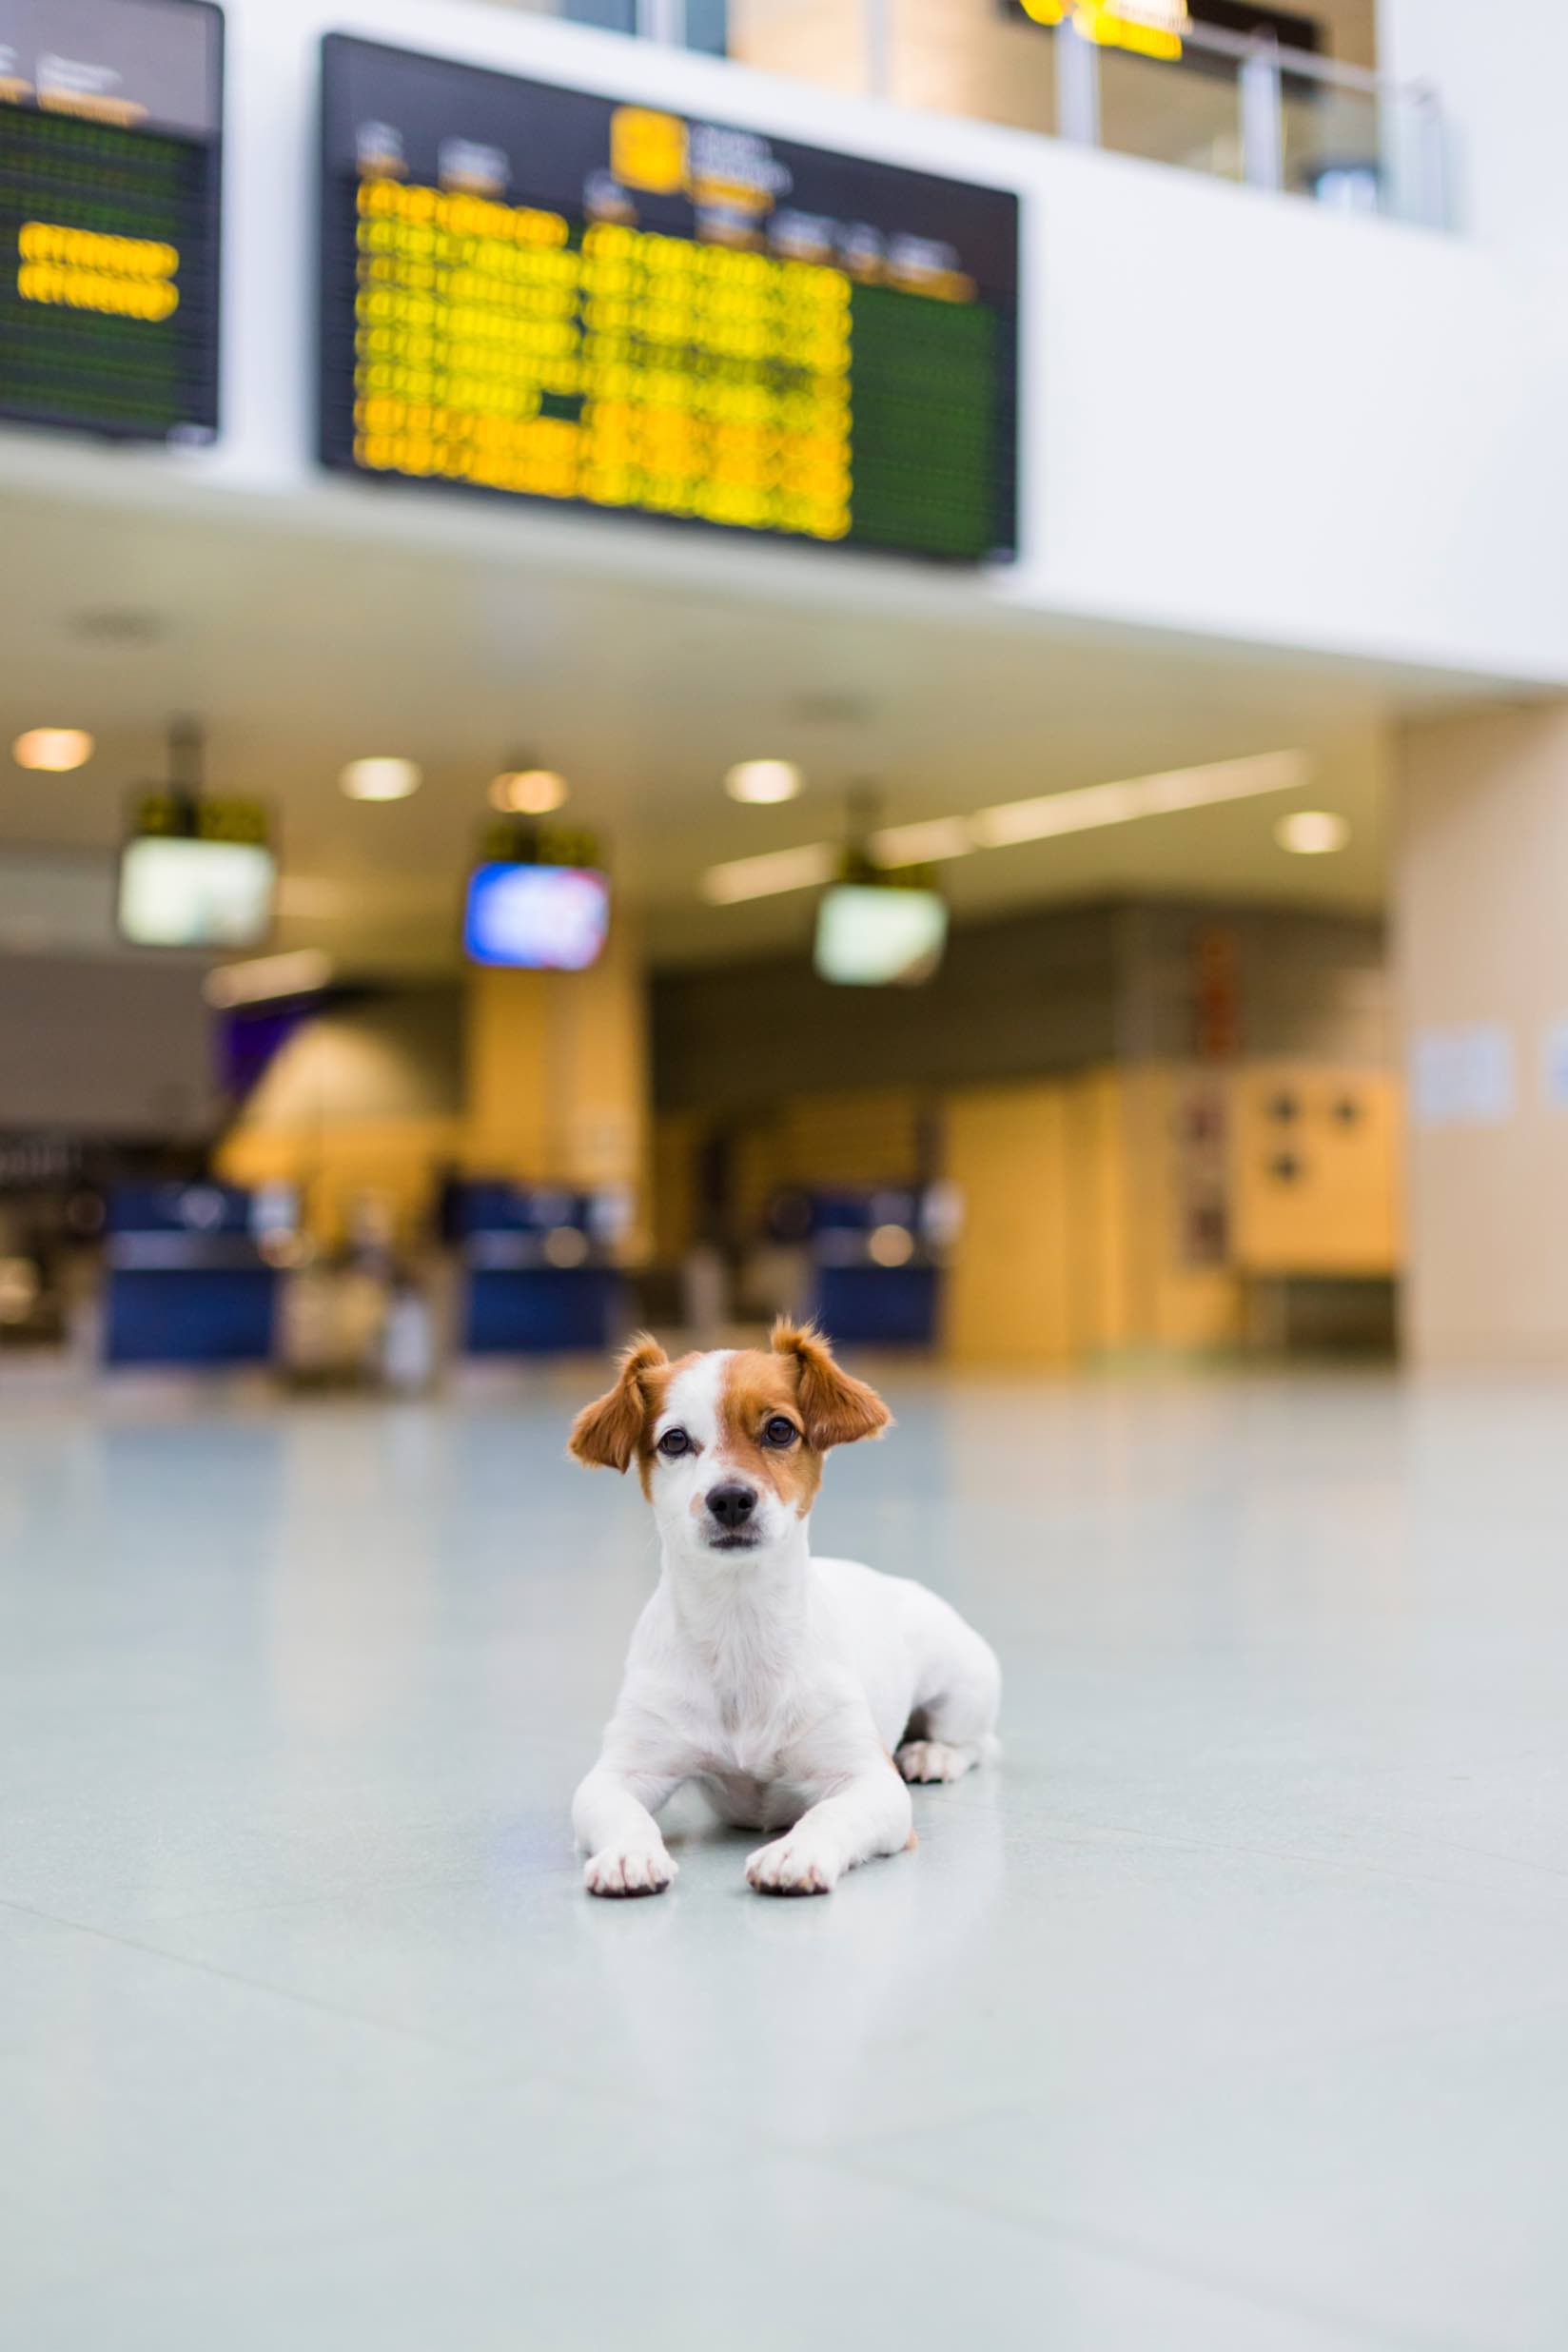 This pup is happy to behave at the airport, especially thanks to training from Dog Training Elite in Durham and Chapel Hill.